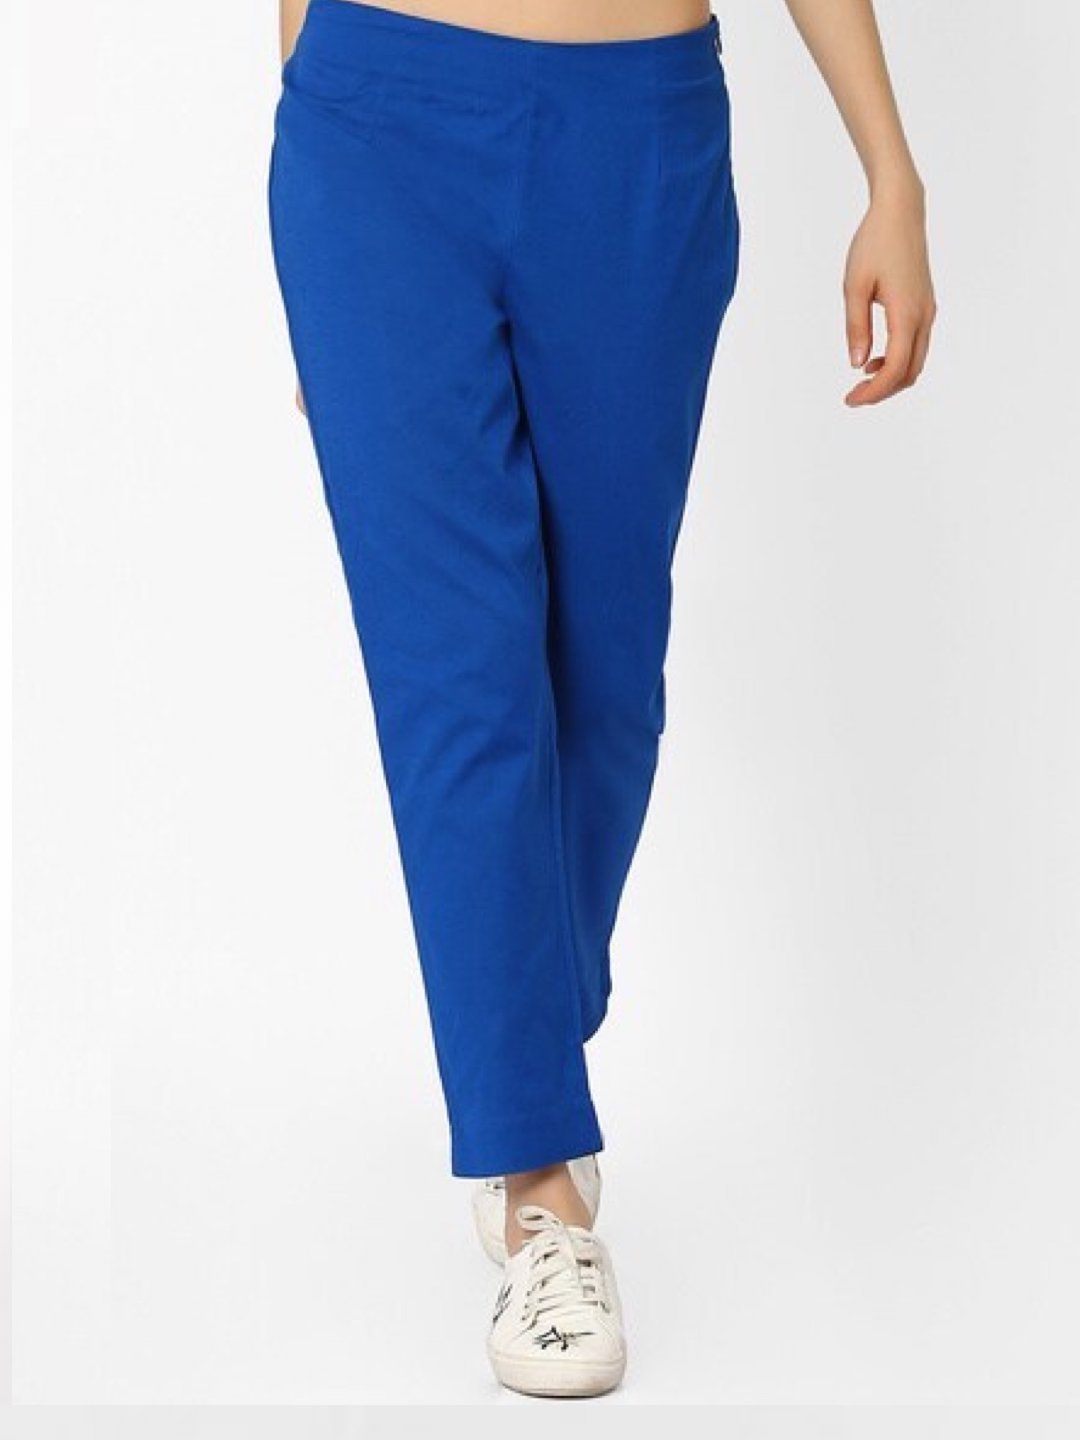 Womens Pant Yoga Pant with 9 Pockets – Petite (93002P) - A Plus Medical Scrubs